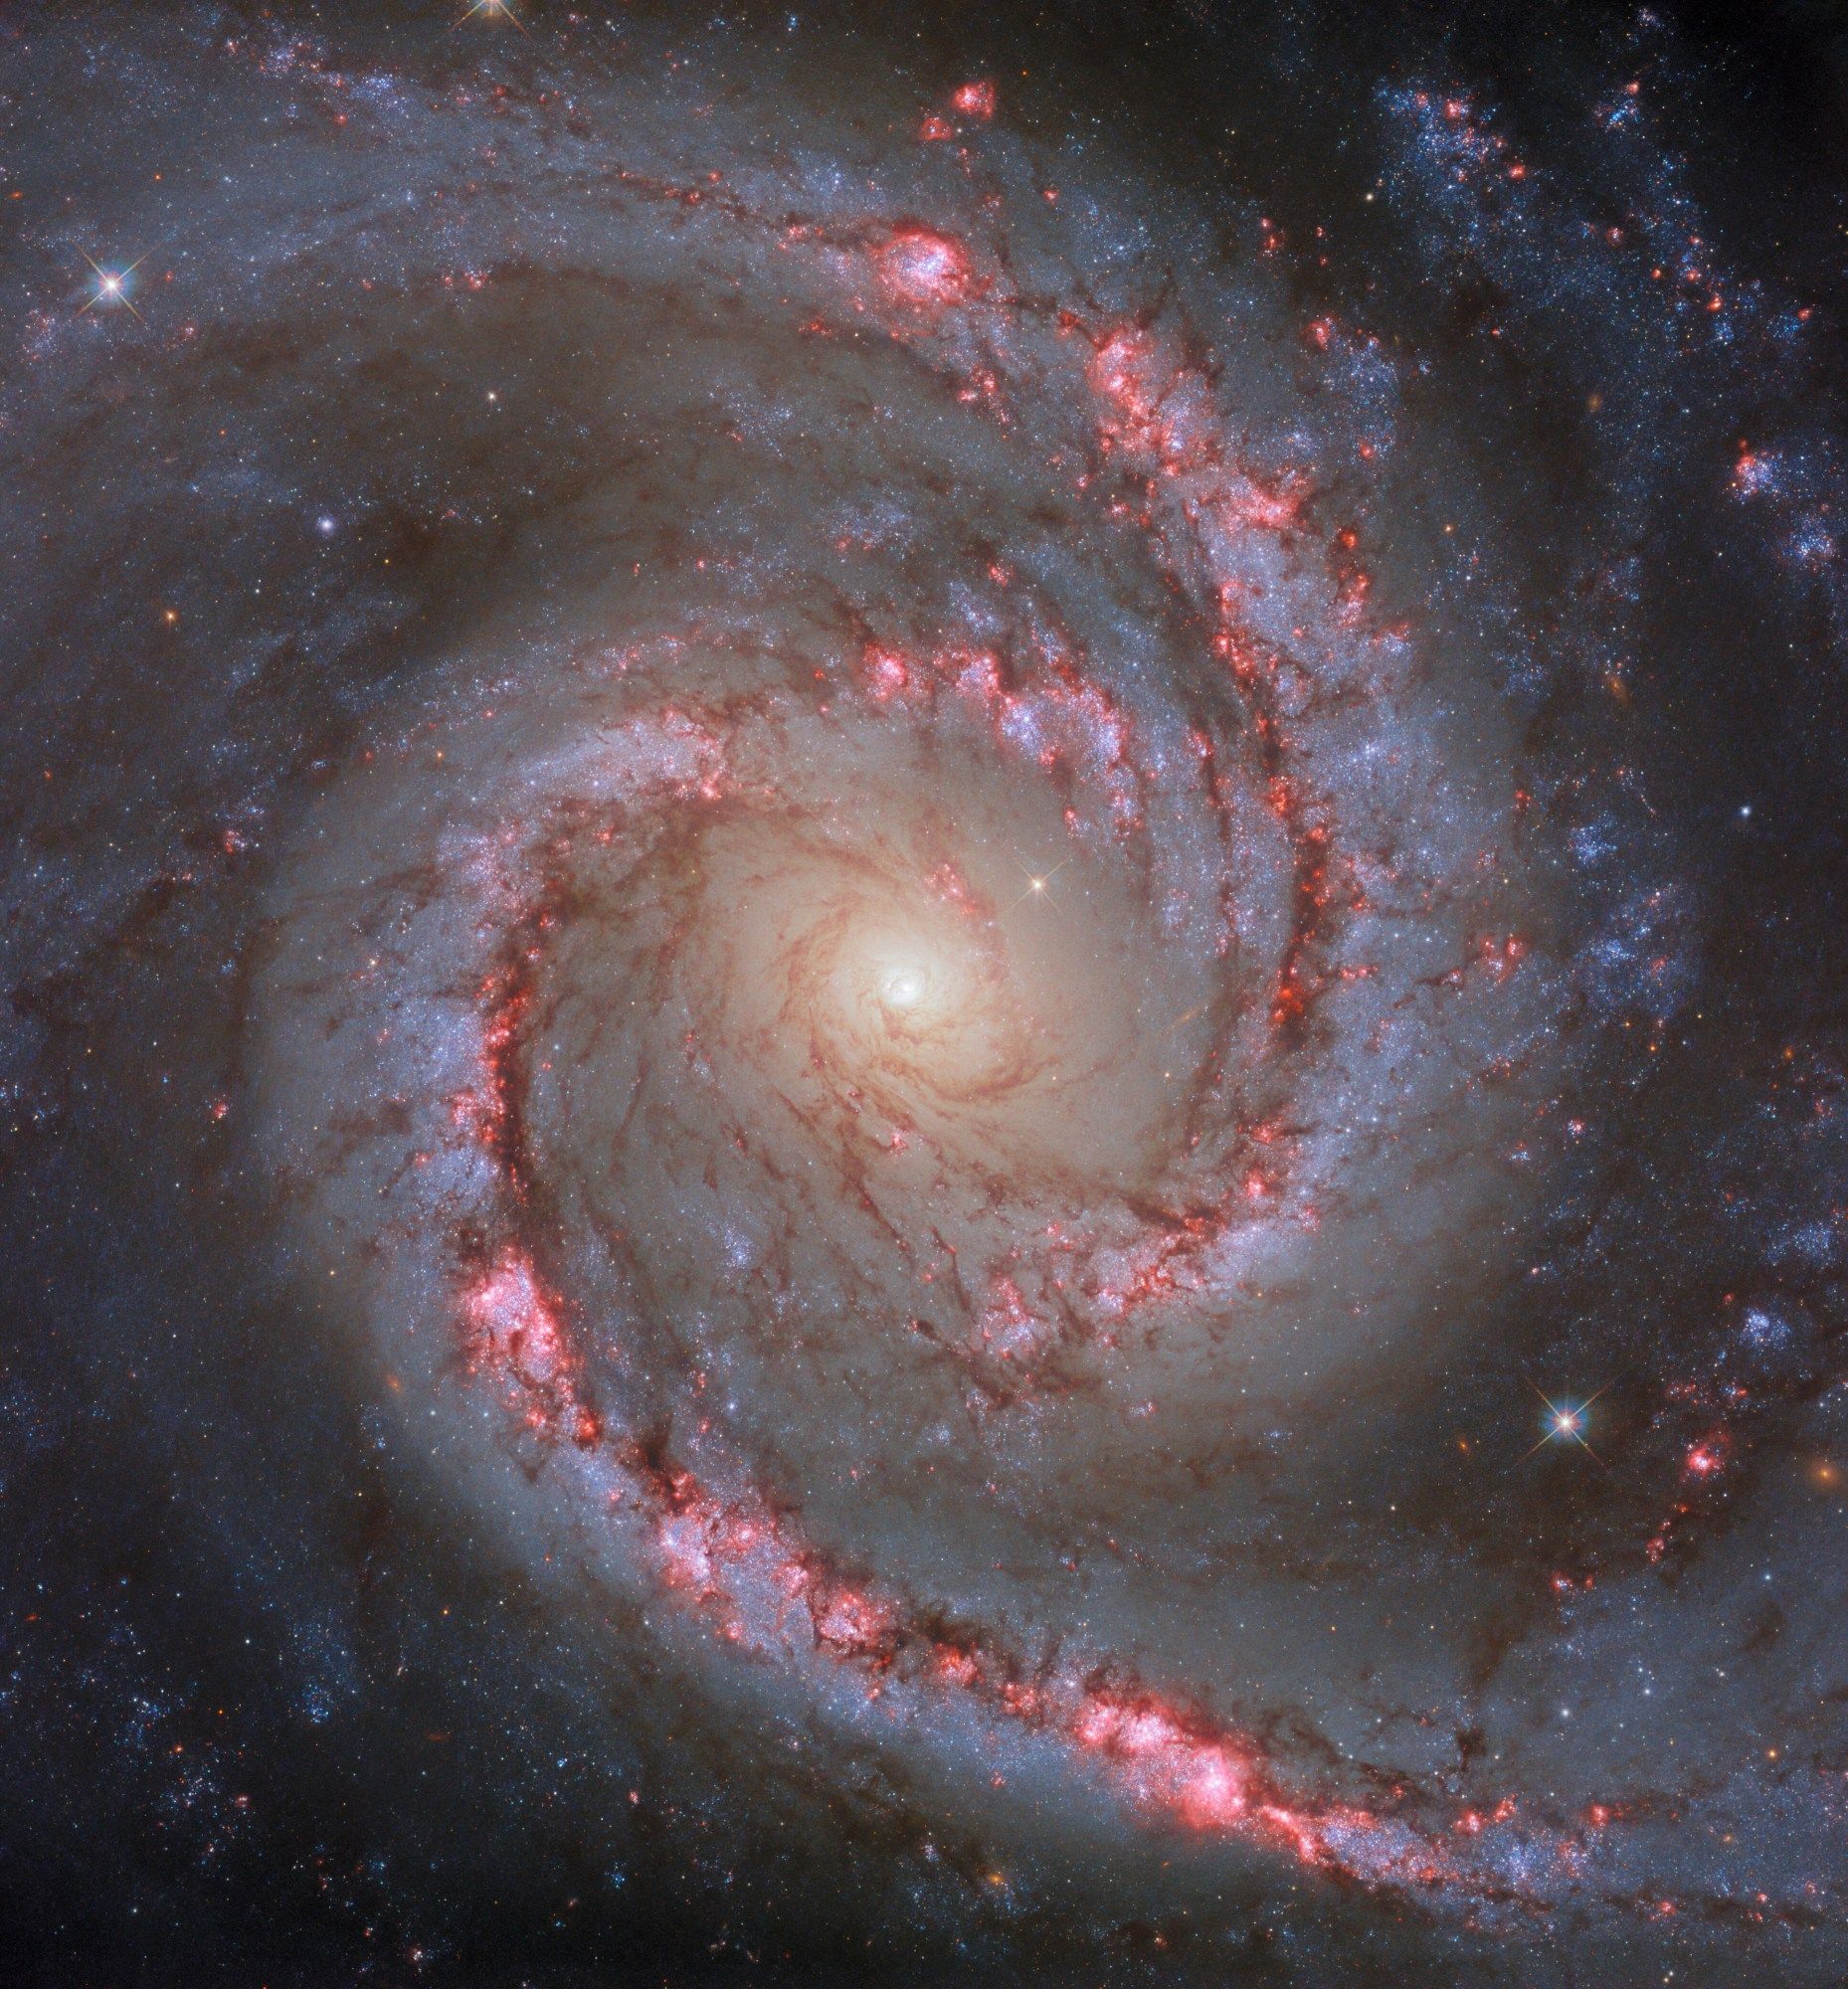 A spiral galaxy centered in the image and face-on to the viewer. It has two spiral arms that each make a half-turn from start to finish. The arms resemble the shape of a comma. Lanes of dark dust follow the arms into the center and split into many strands that swirl around the glowing galactic core. Bright pink blooms along the arms show areas of new star formation.